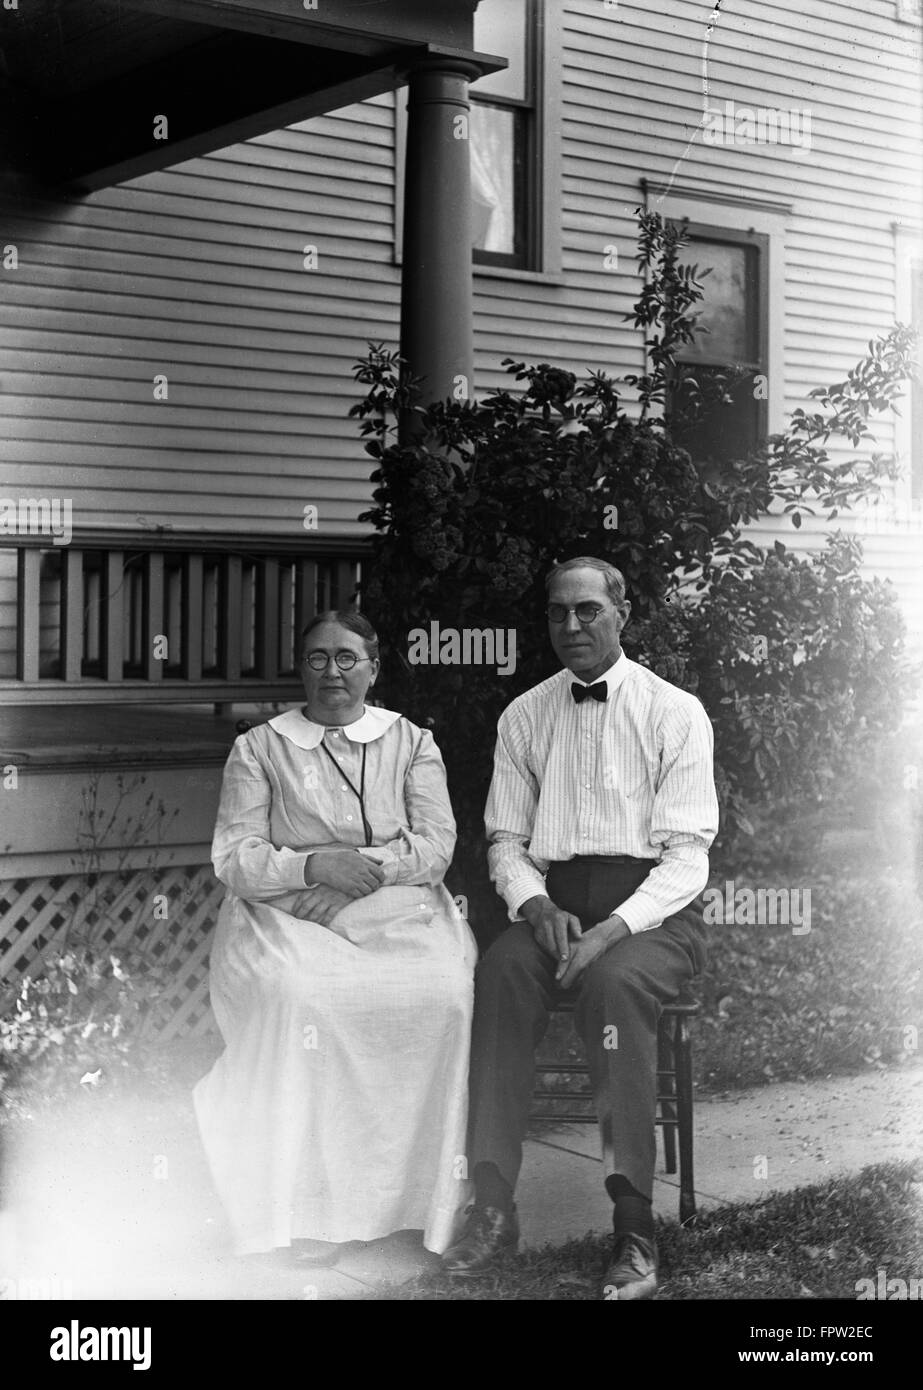 1900s PORTRAIT COUPLE MAN WOMAN SITTING ON CHAIRS IN FRONT OF HOUSE LOOKING AT CAMERA Stock Photo